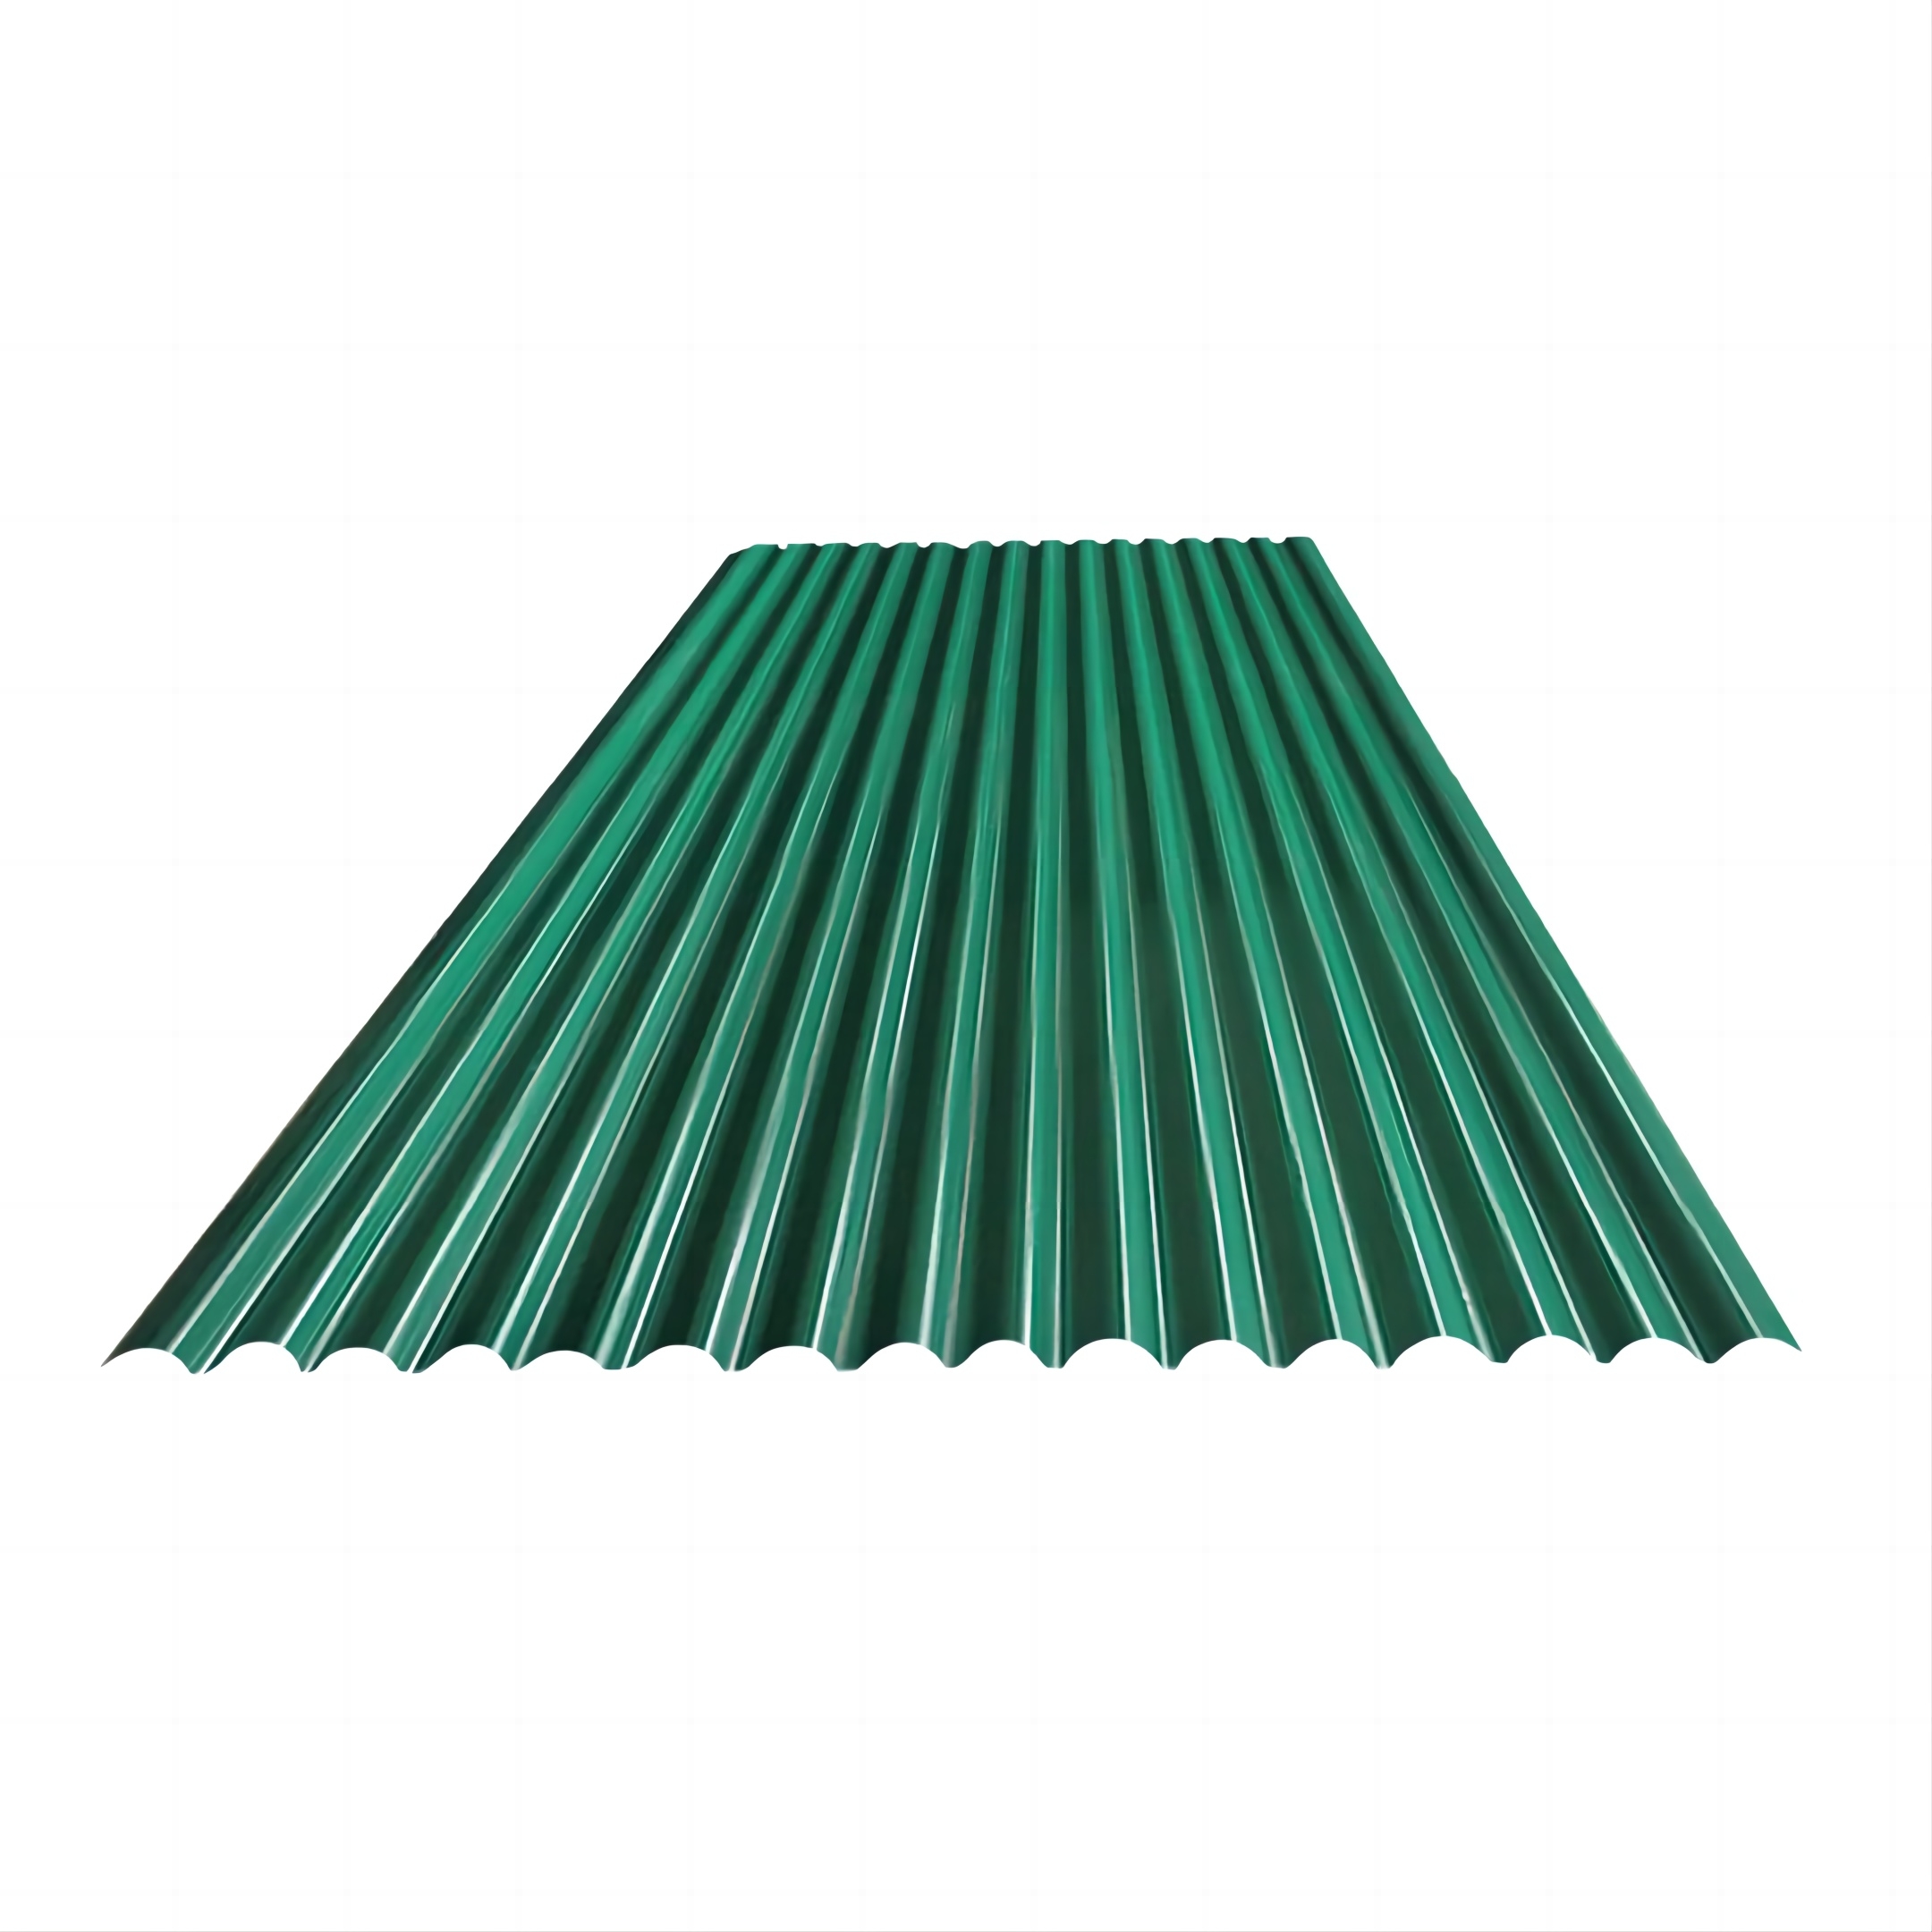 Corrugated Painted Aluminum Roofing Sheets